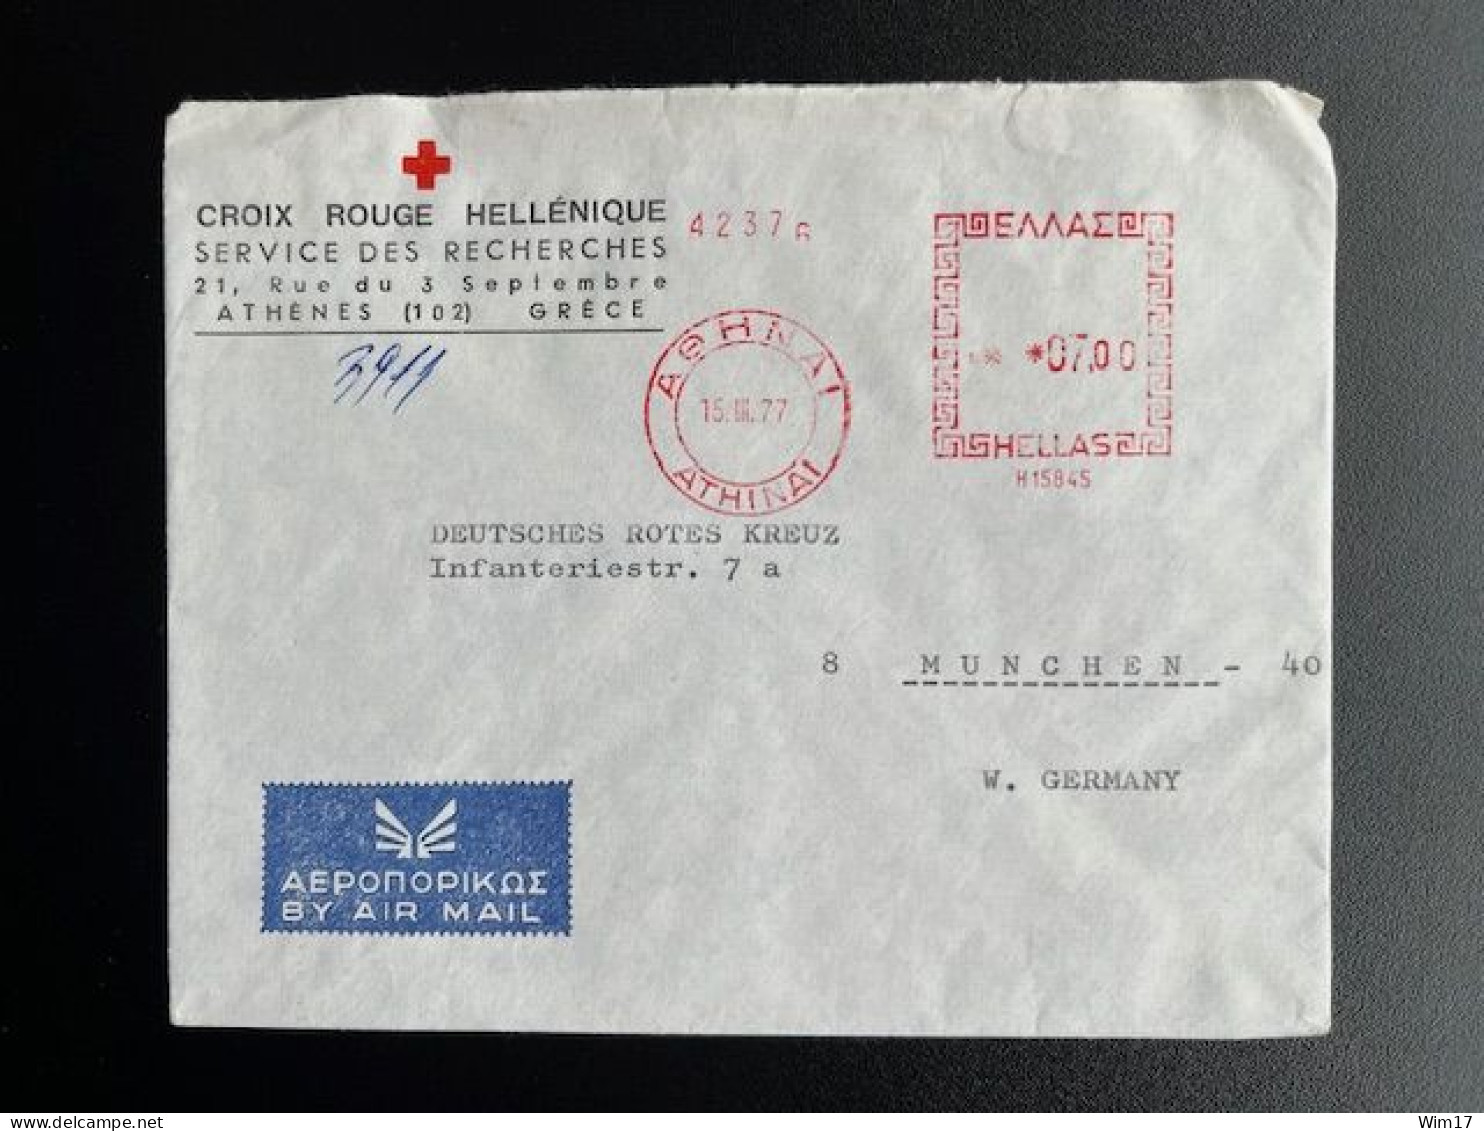 GREECE 1977 LETTER ATHENS TO MUNICH 15-03-1977 GRIEKENLAND RED CROSS - Lettres & Documents